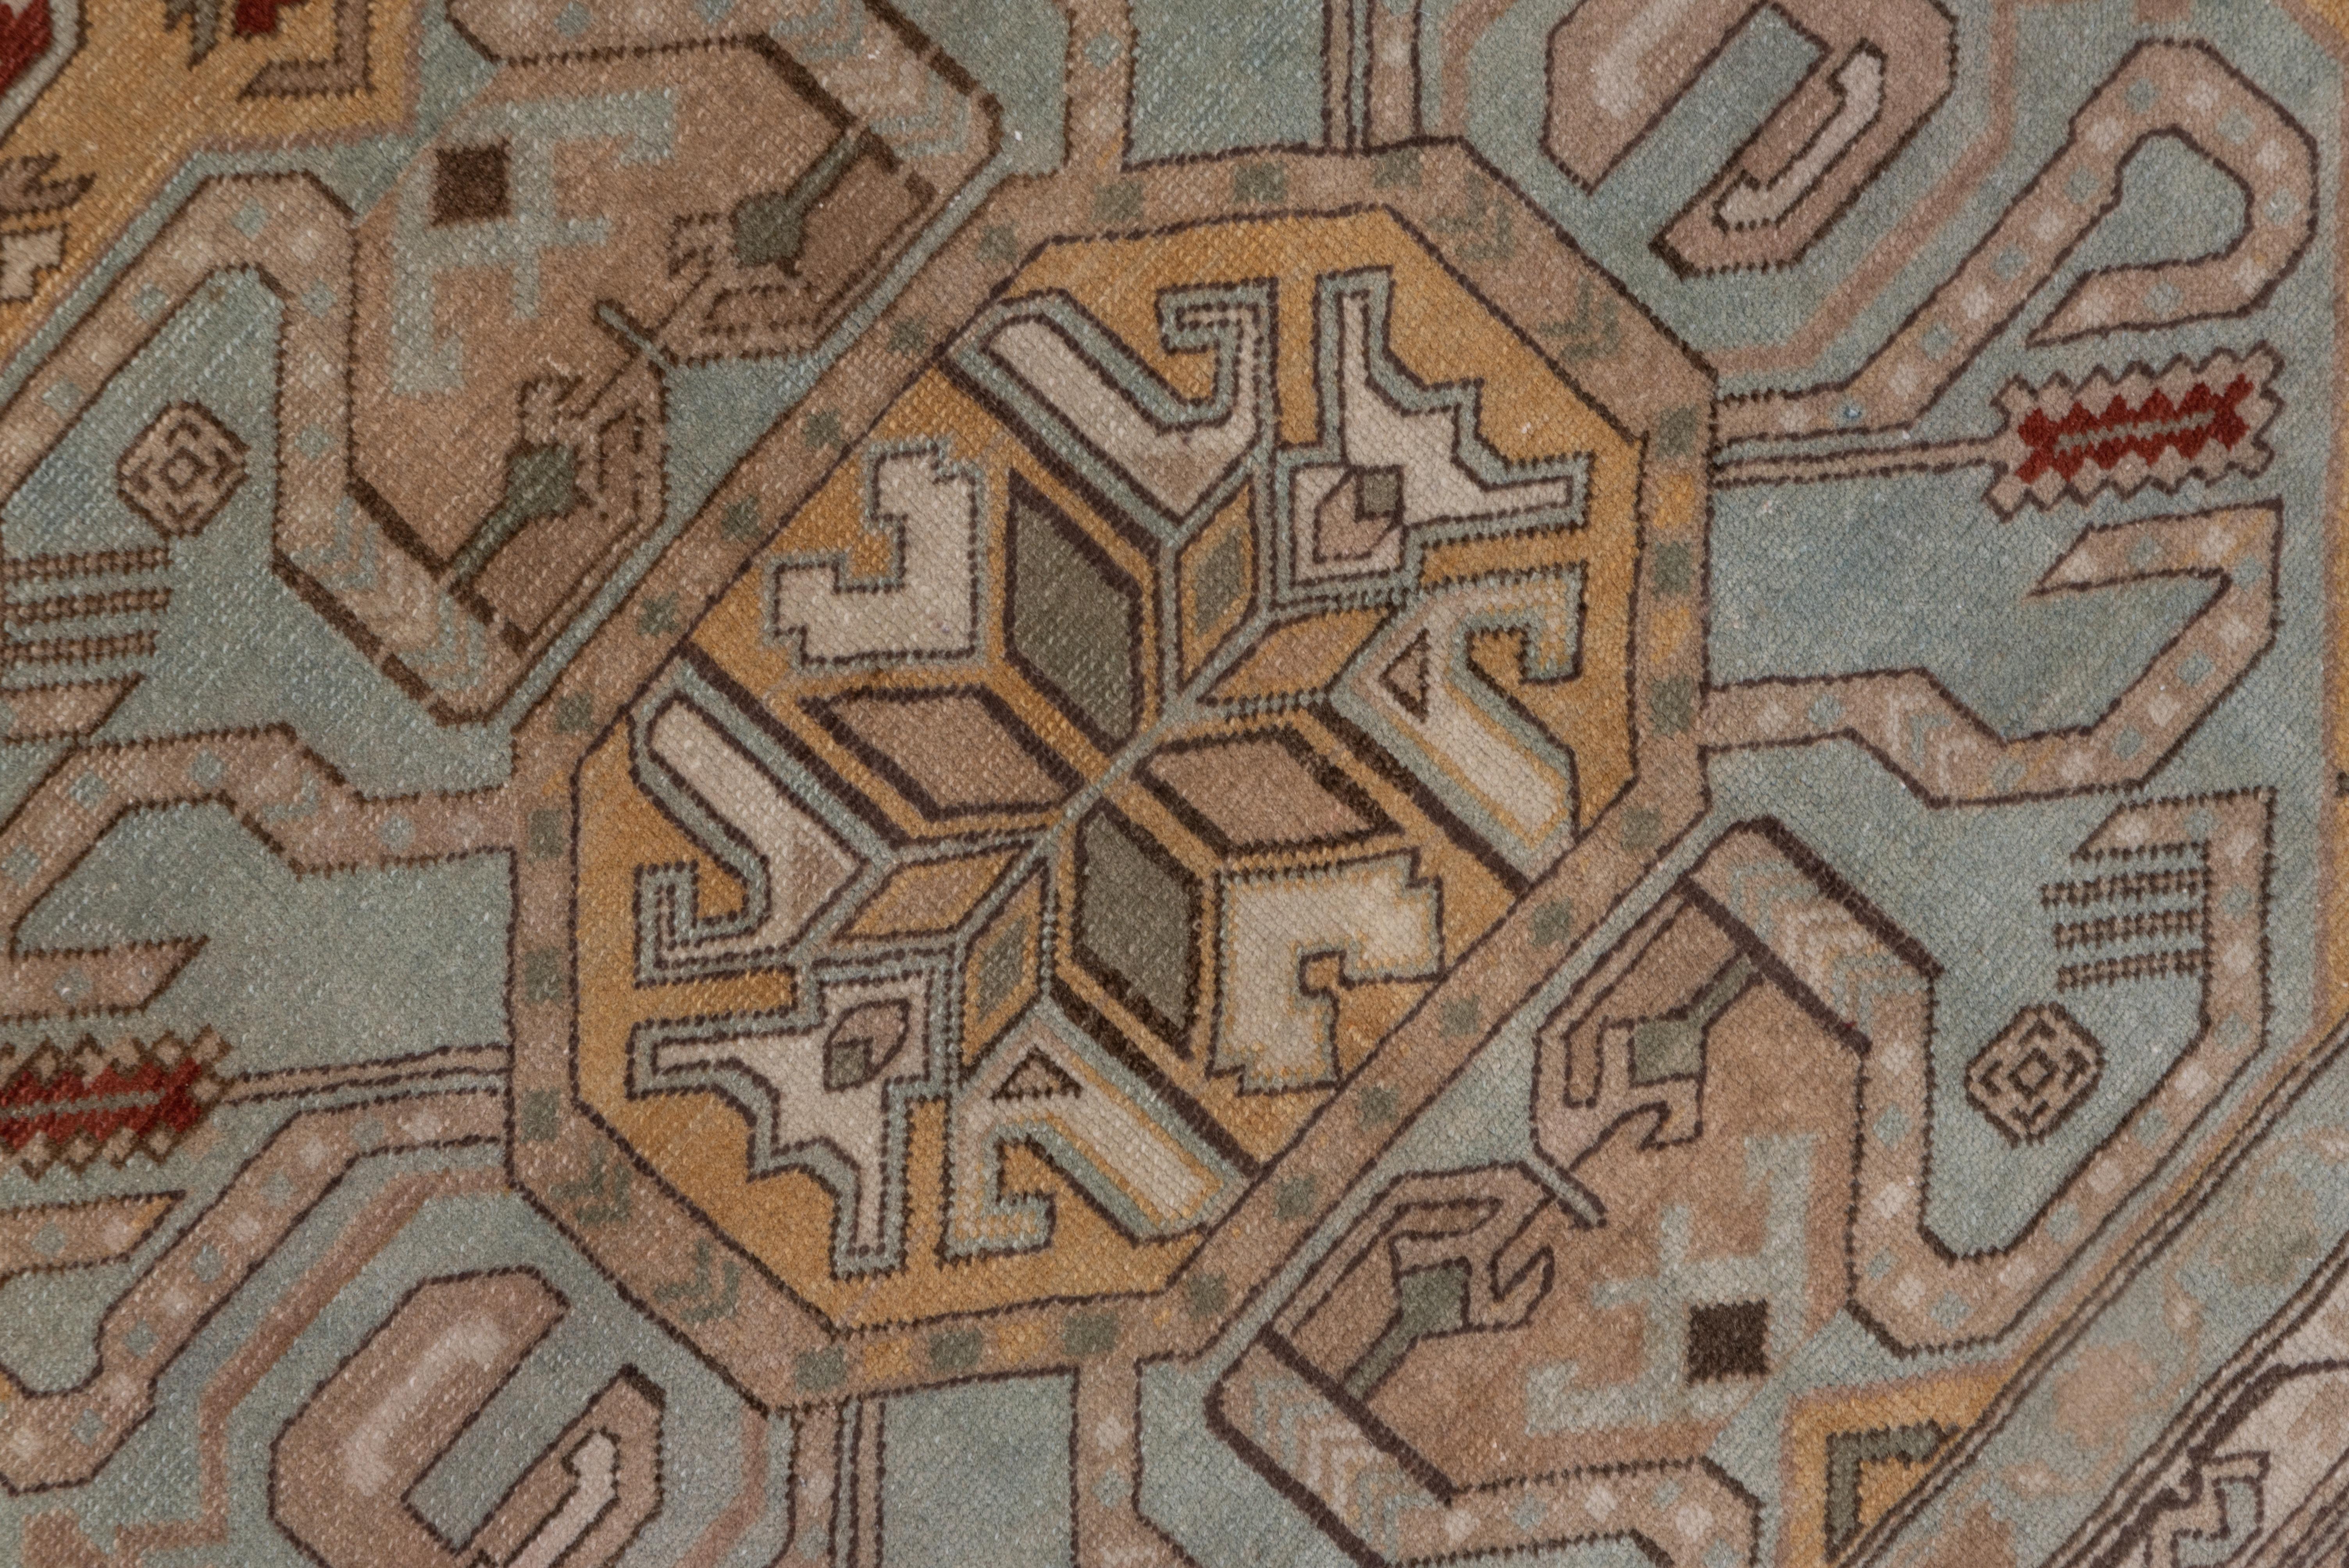 The orange field features three octagons in powder blue and ecru, with wriggling dark brown cloud band shapes within, and a main border of rosettes within vinery octagons.